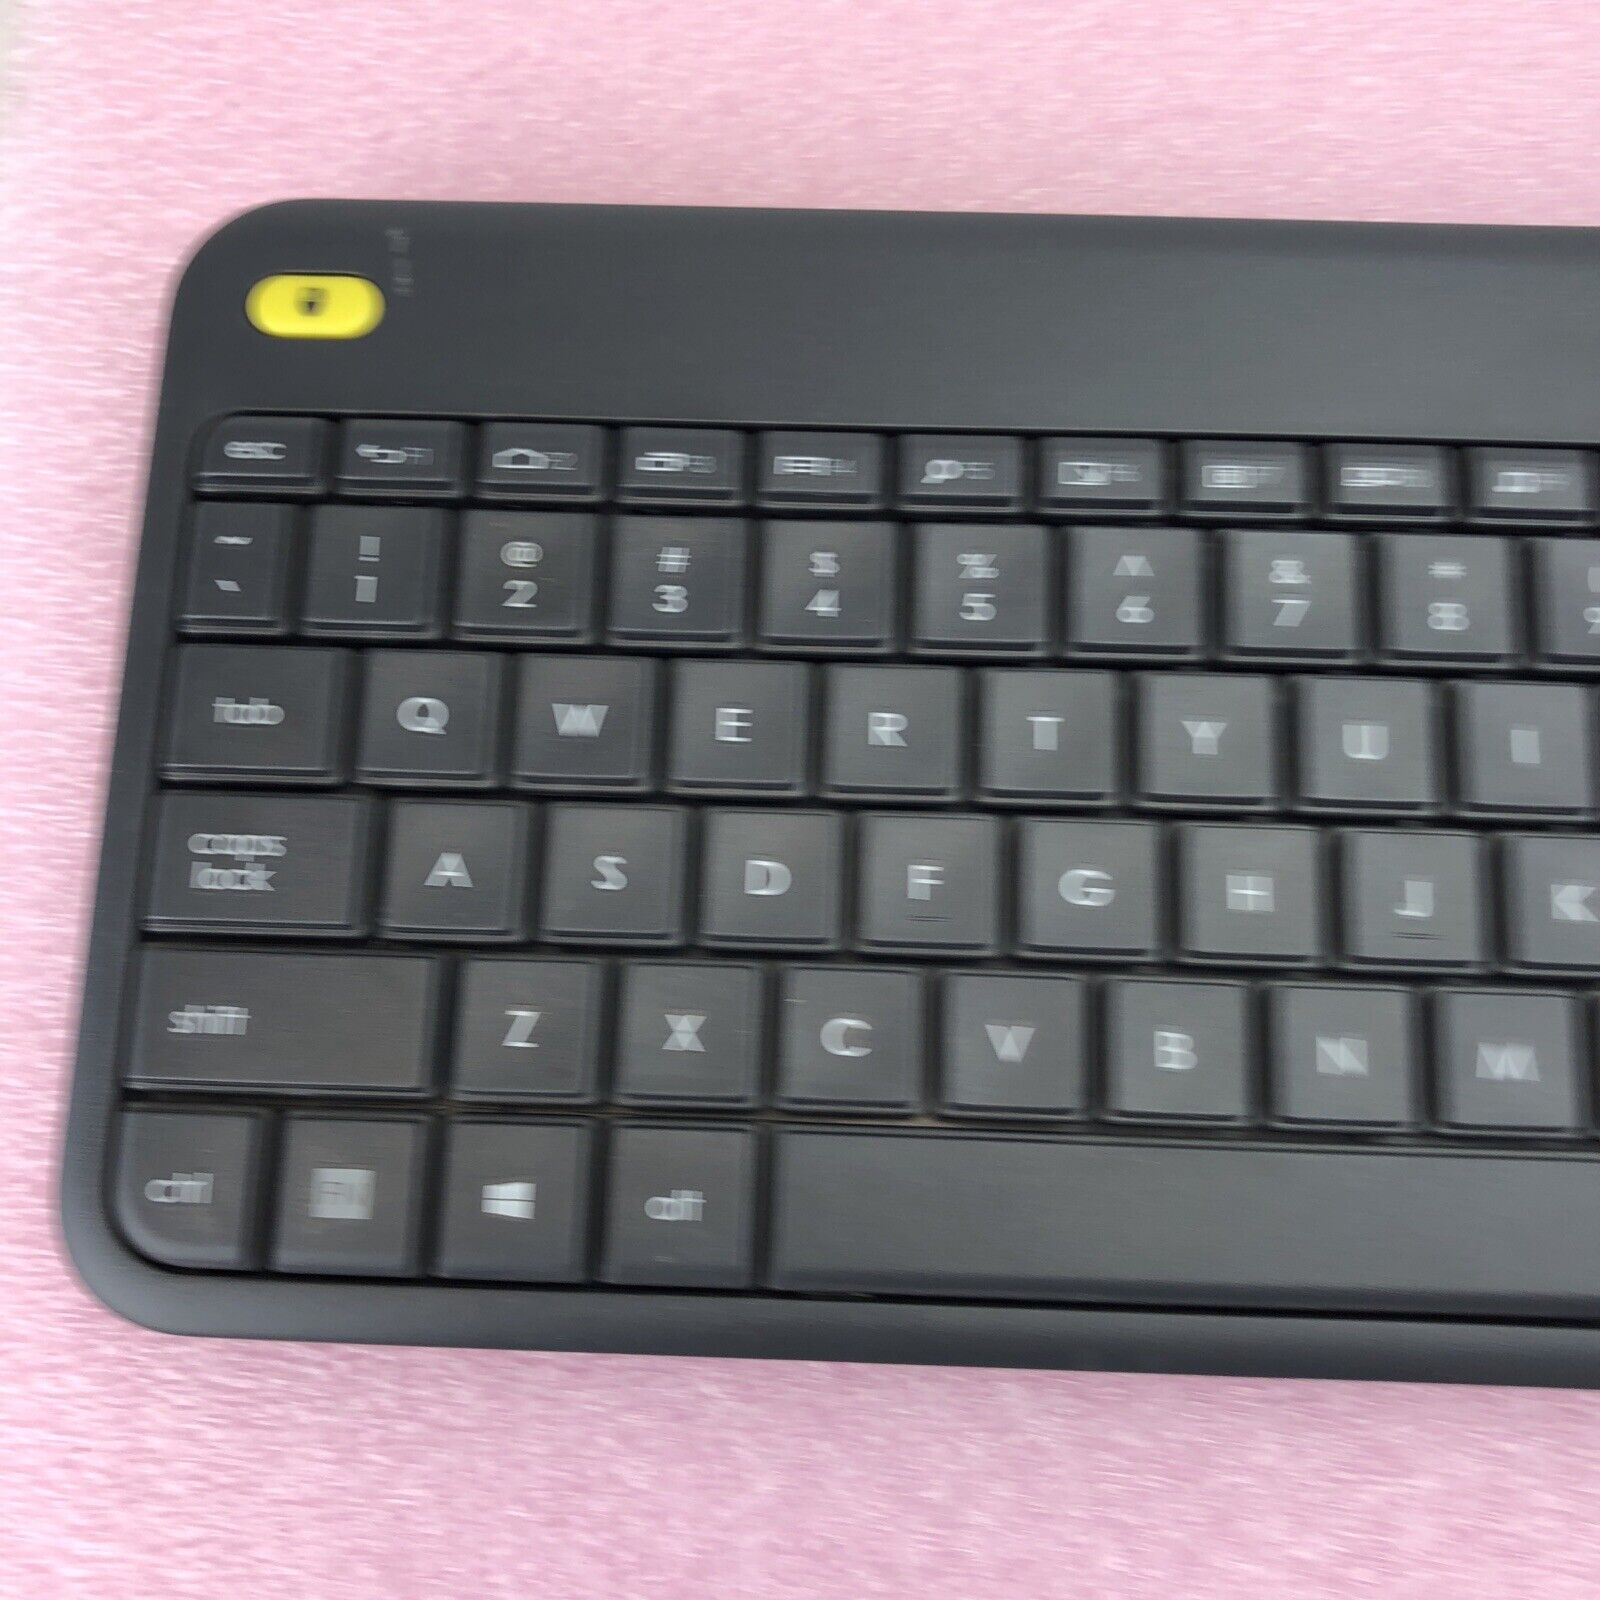 Logitech Wireless Touch Keyboard K400 Plus Black with Yellow Highlights